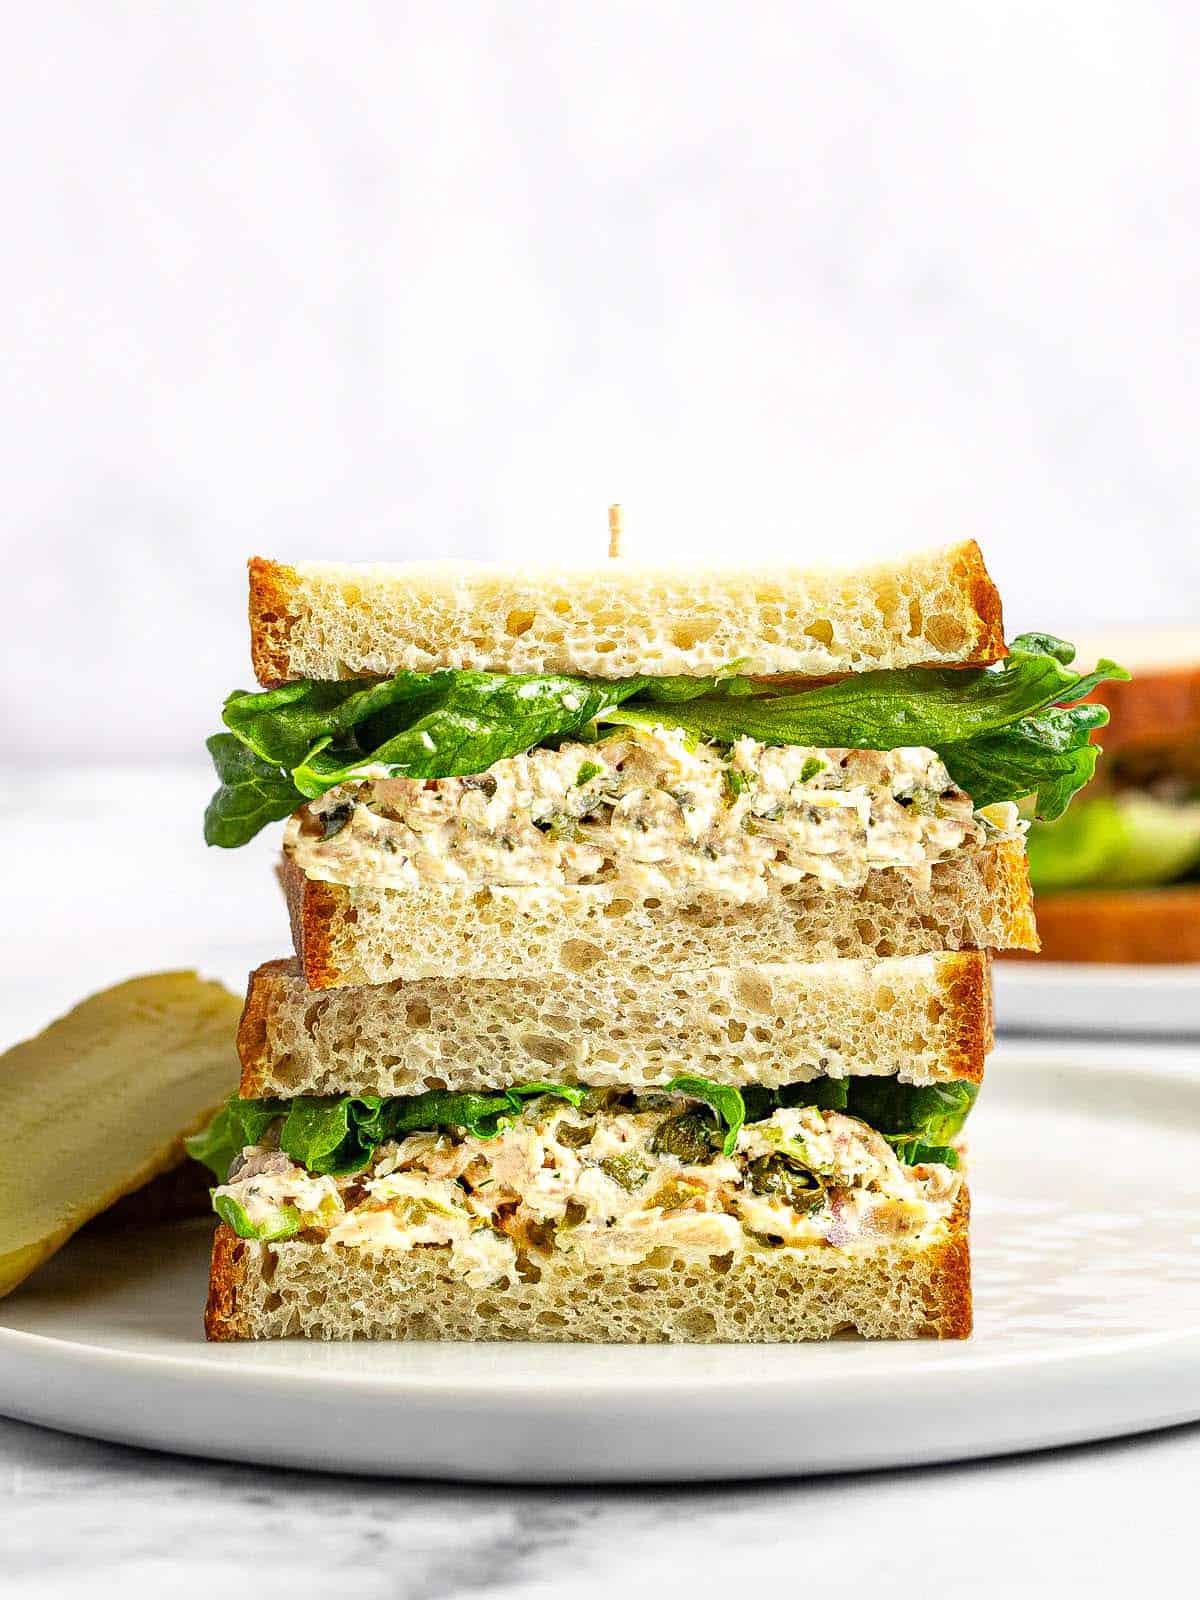 Tuna sandwich with lettuce sliced in half and stacked on a white plate.